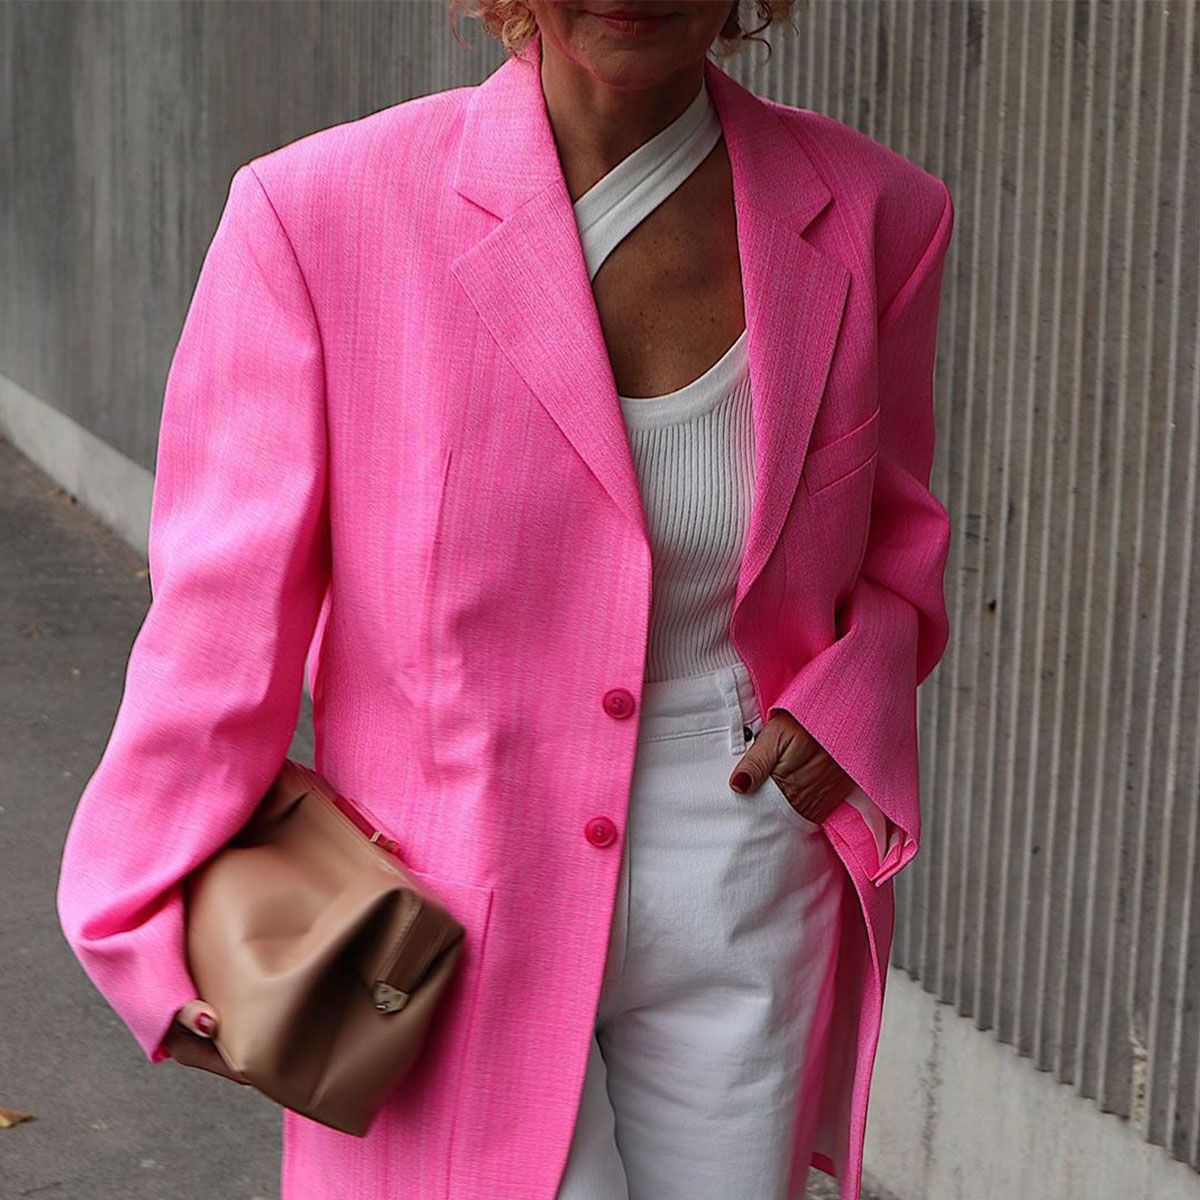 5 Fashion Tips for Women Over 40 - MY CHIC OBSESSION